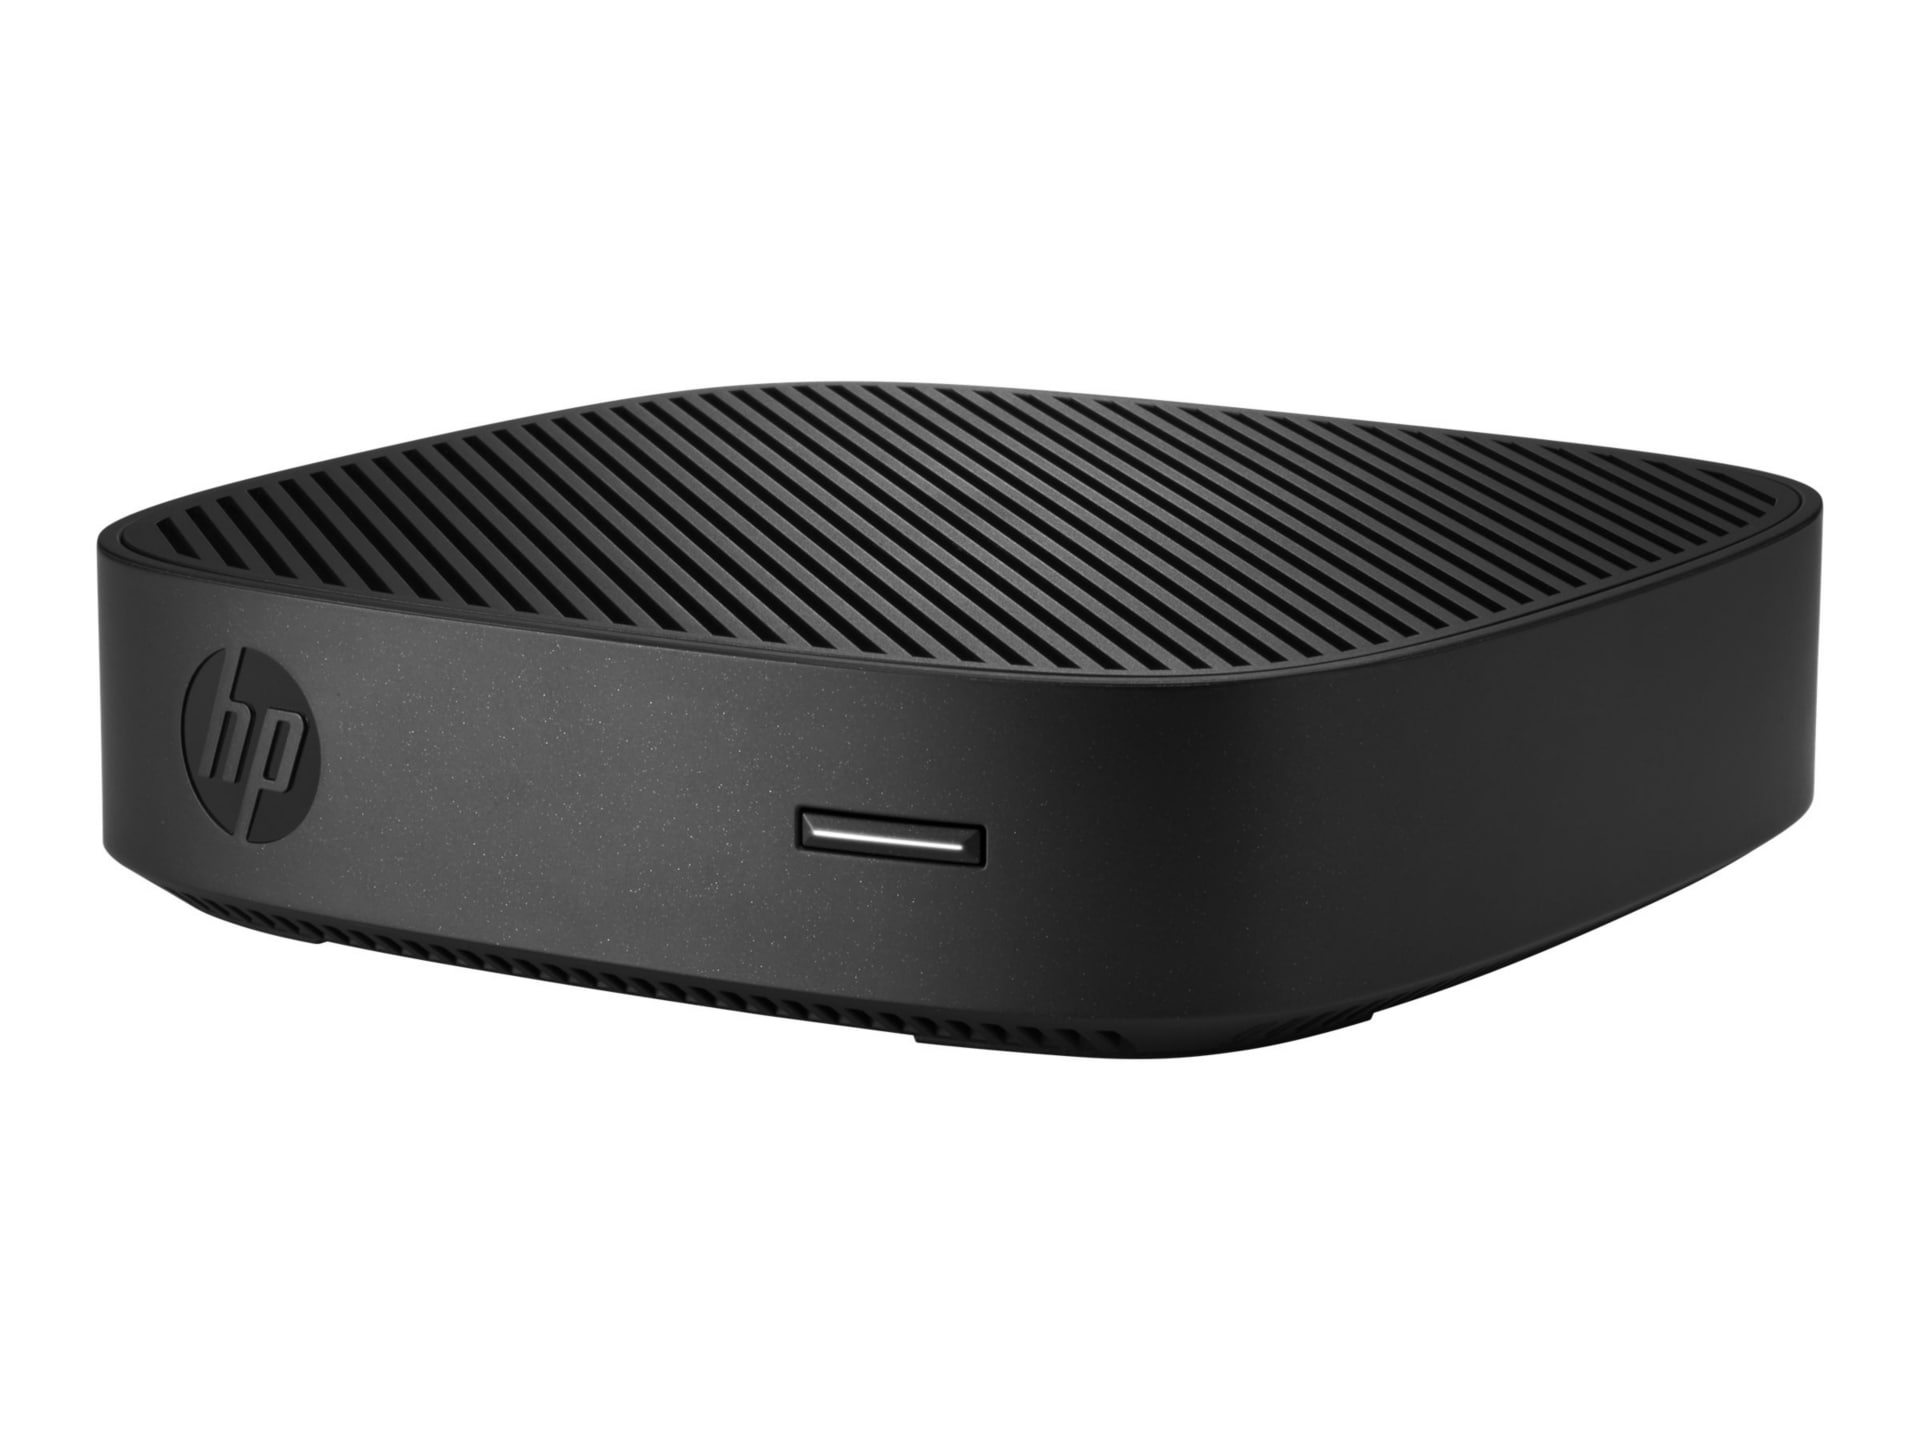 HP t430 ThinPro Thin Client